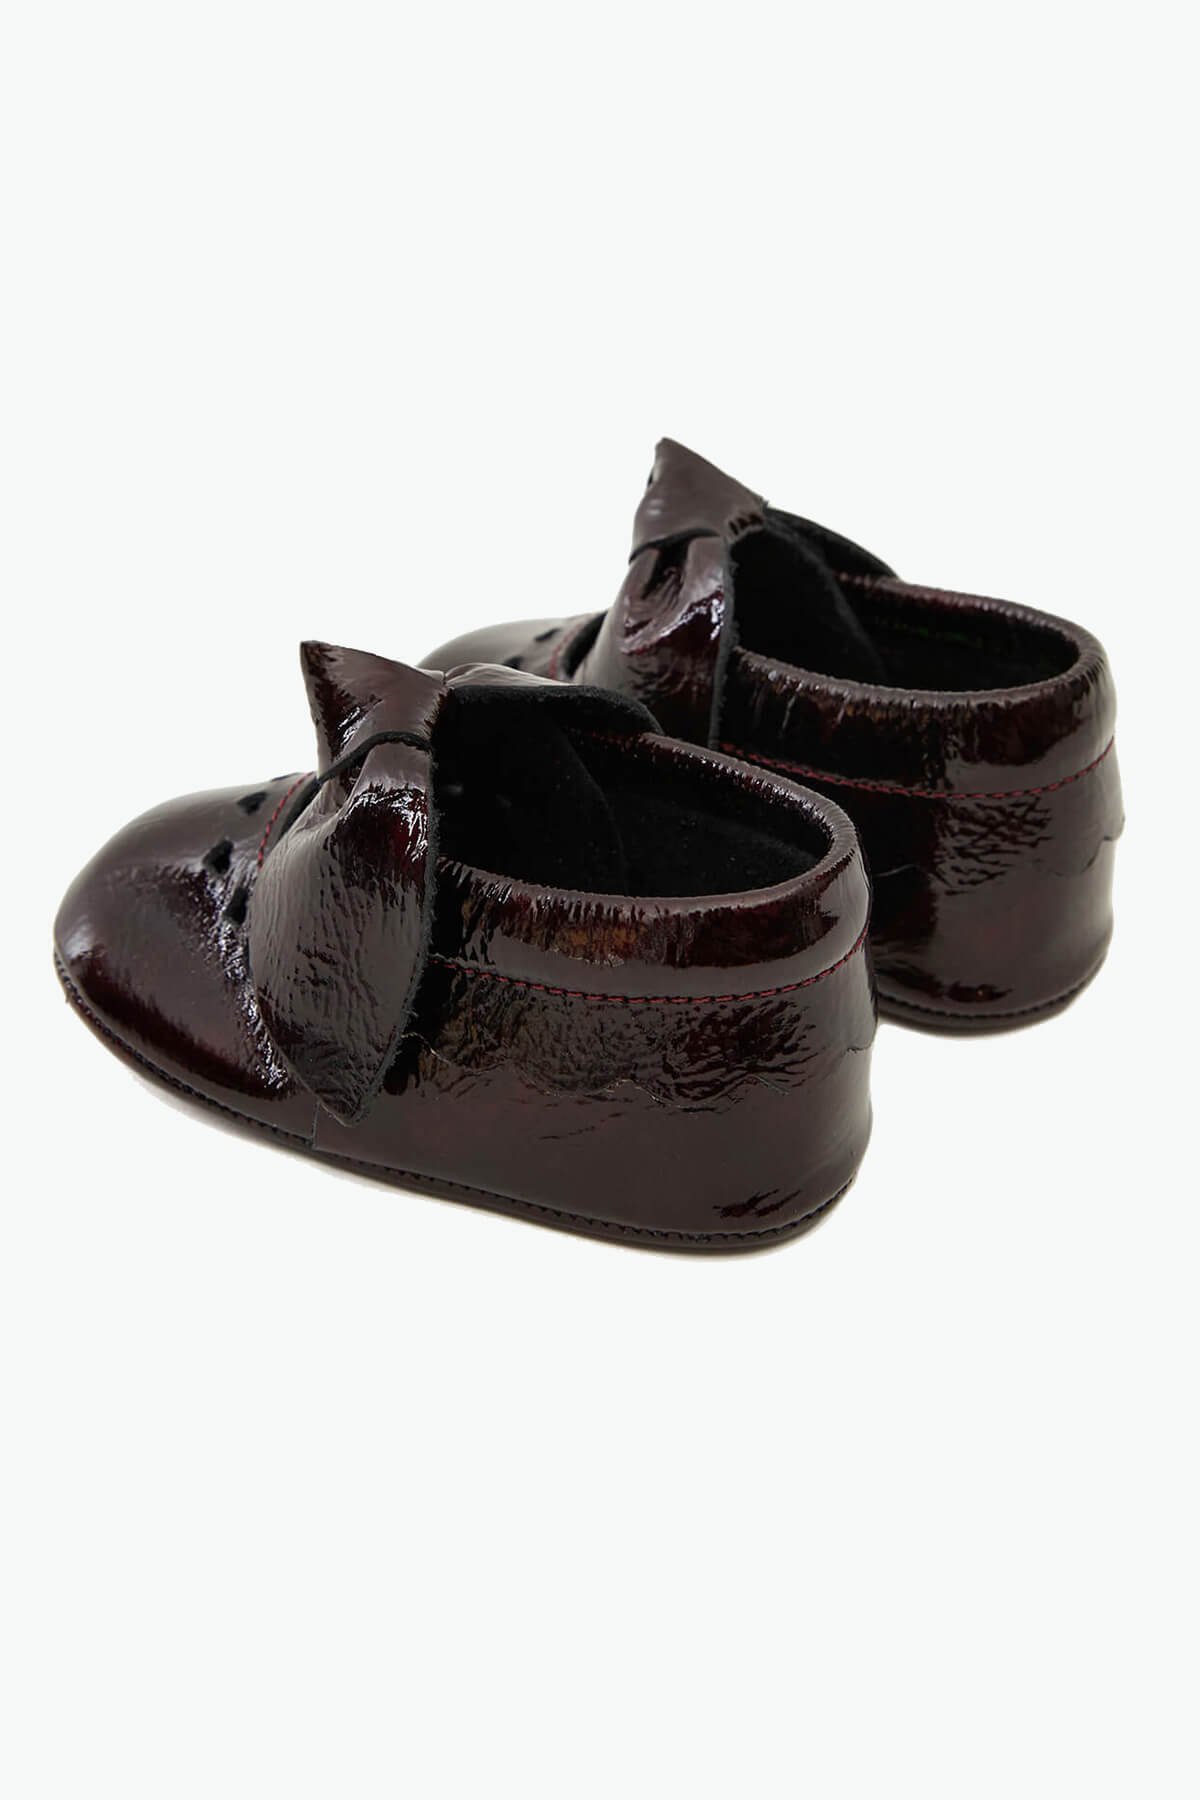 Heart Genuine Leather Baby Shoes Claret Red